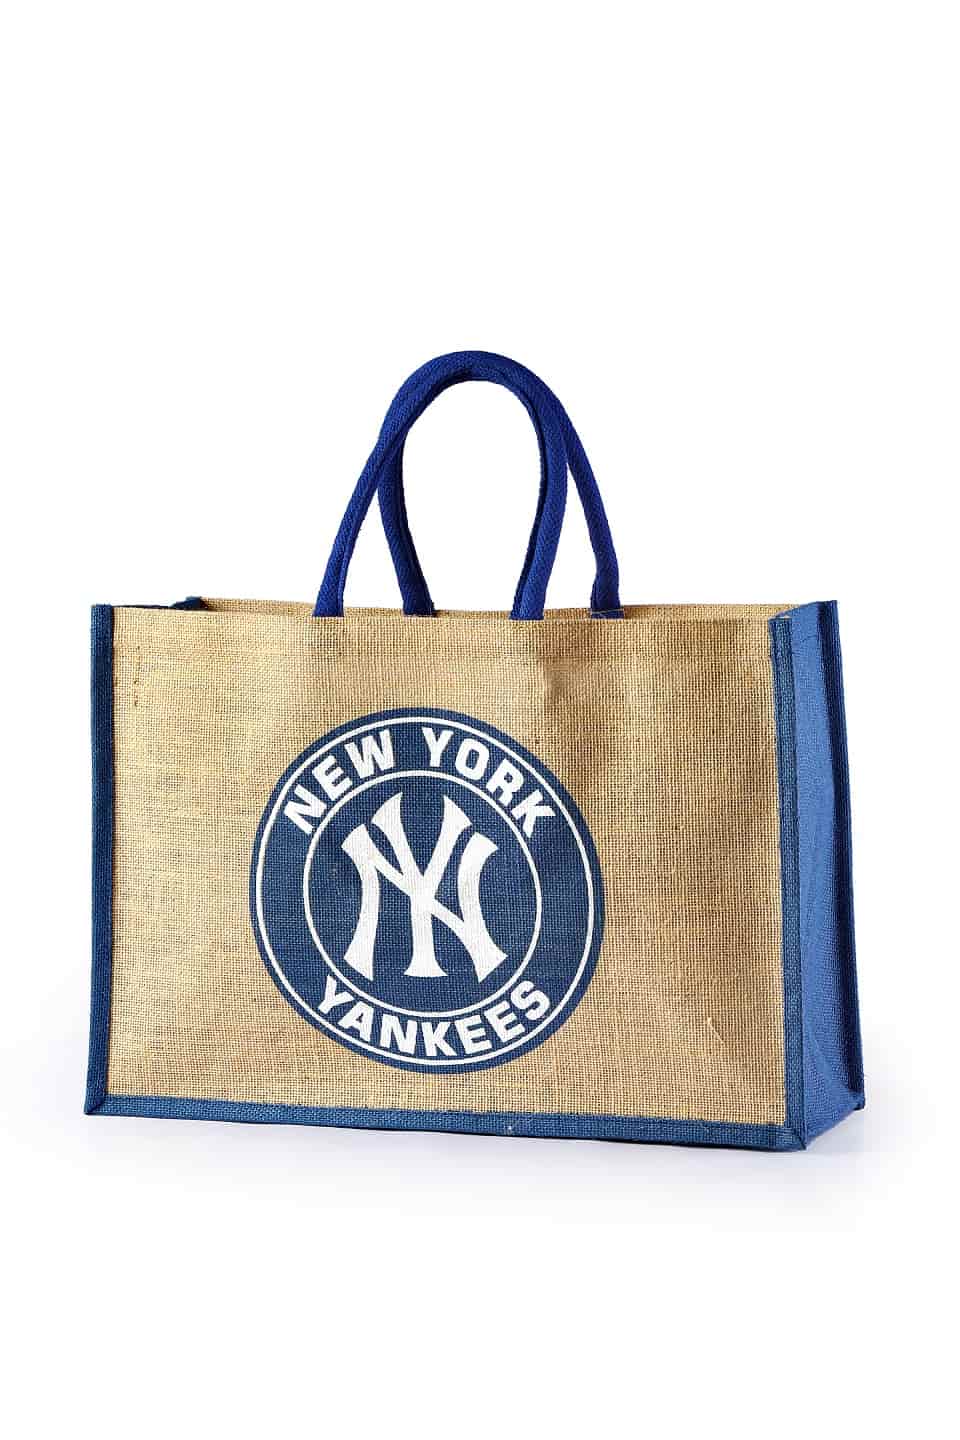 Jute Promotional Bags Manufacturer and Exporter from Kolkata India